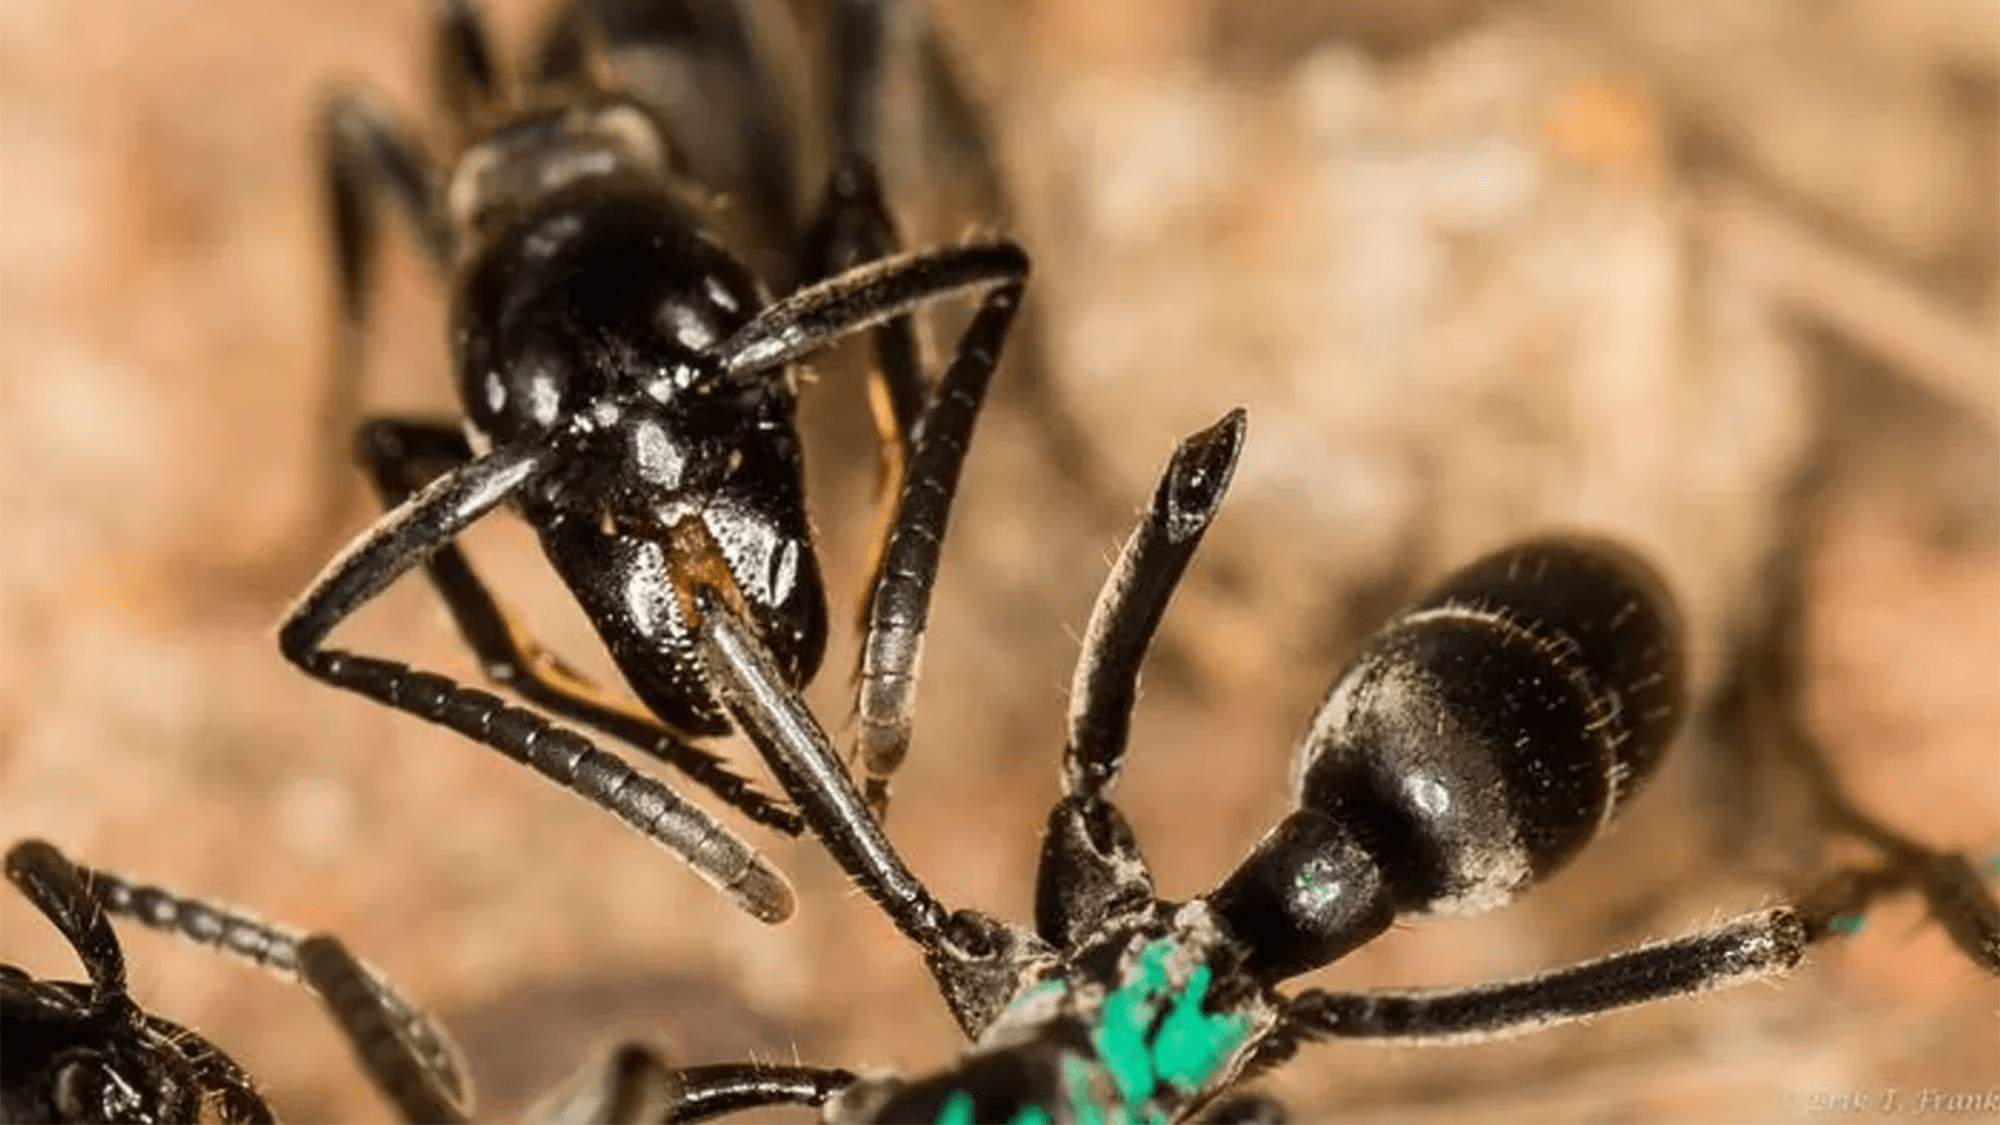 Matabele ants might be able to diagnose and treat infected wounds